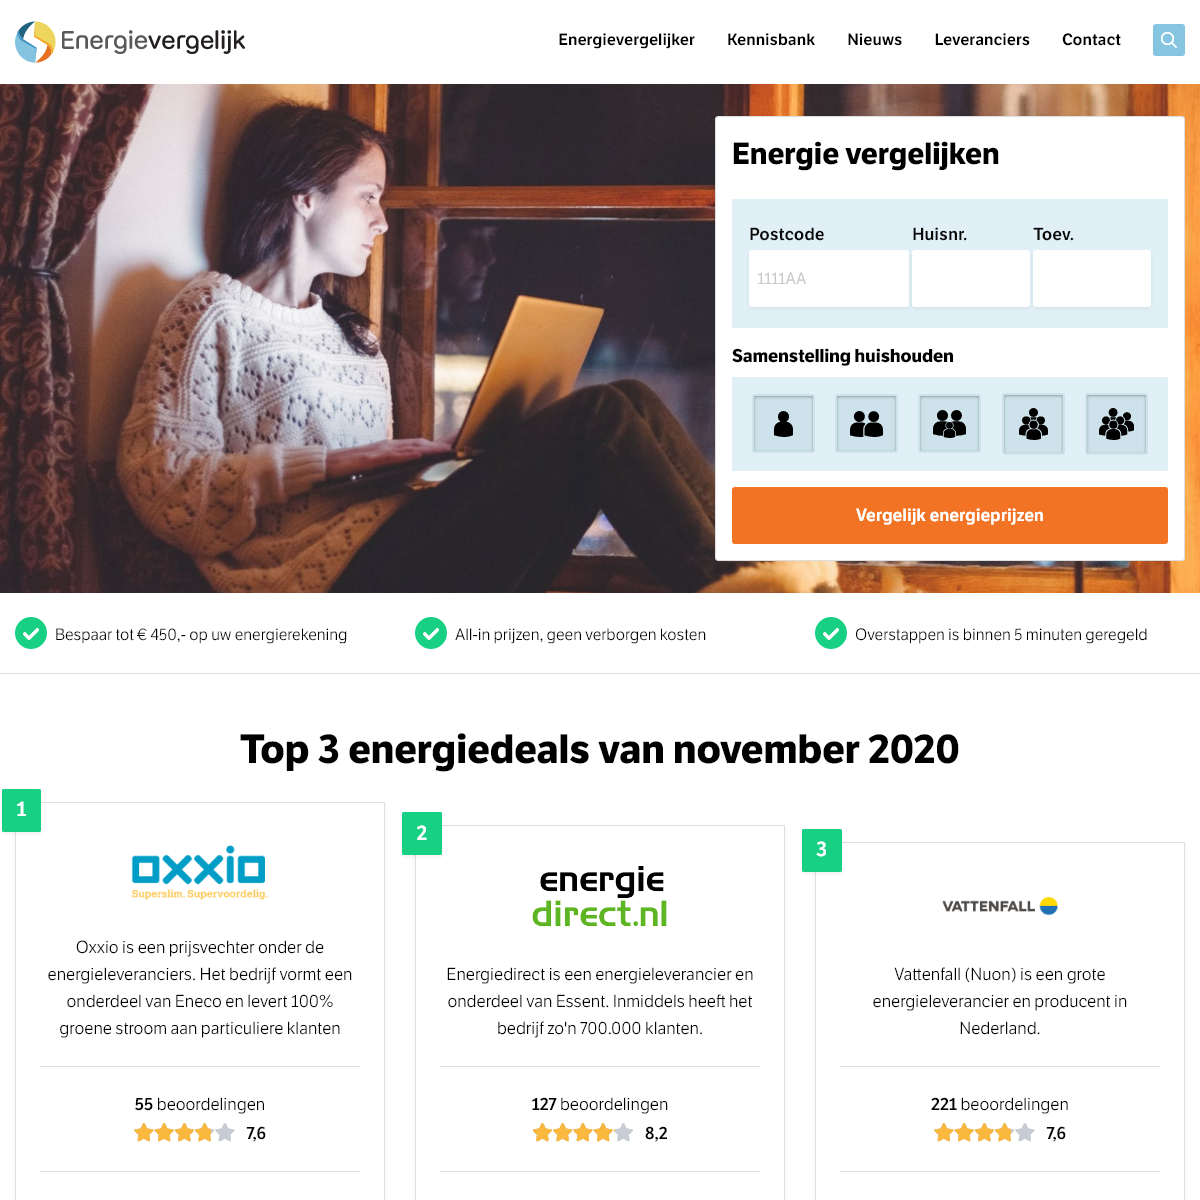 A complete backup of energieportal.nl